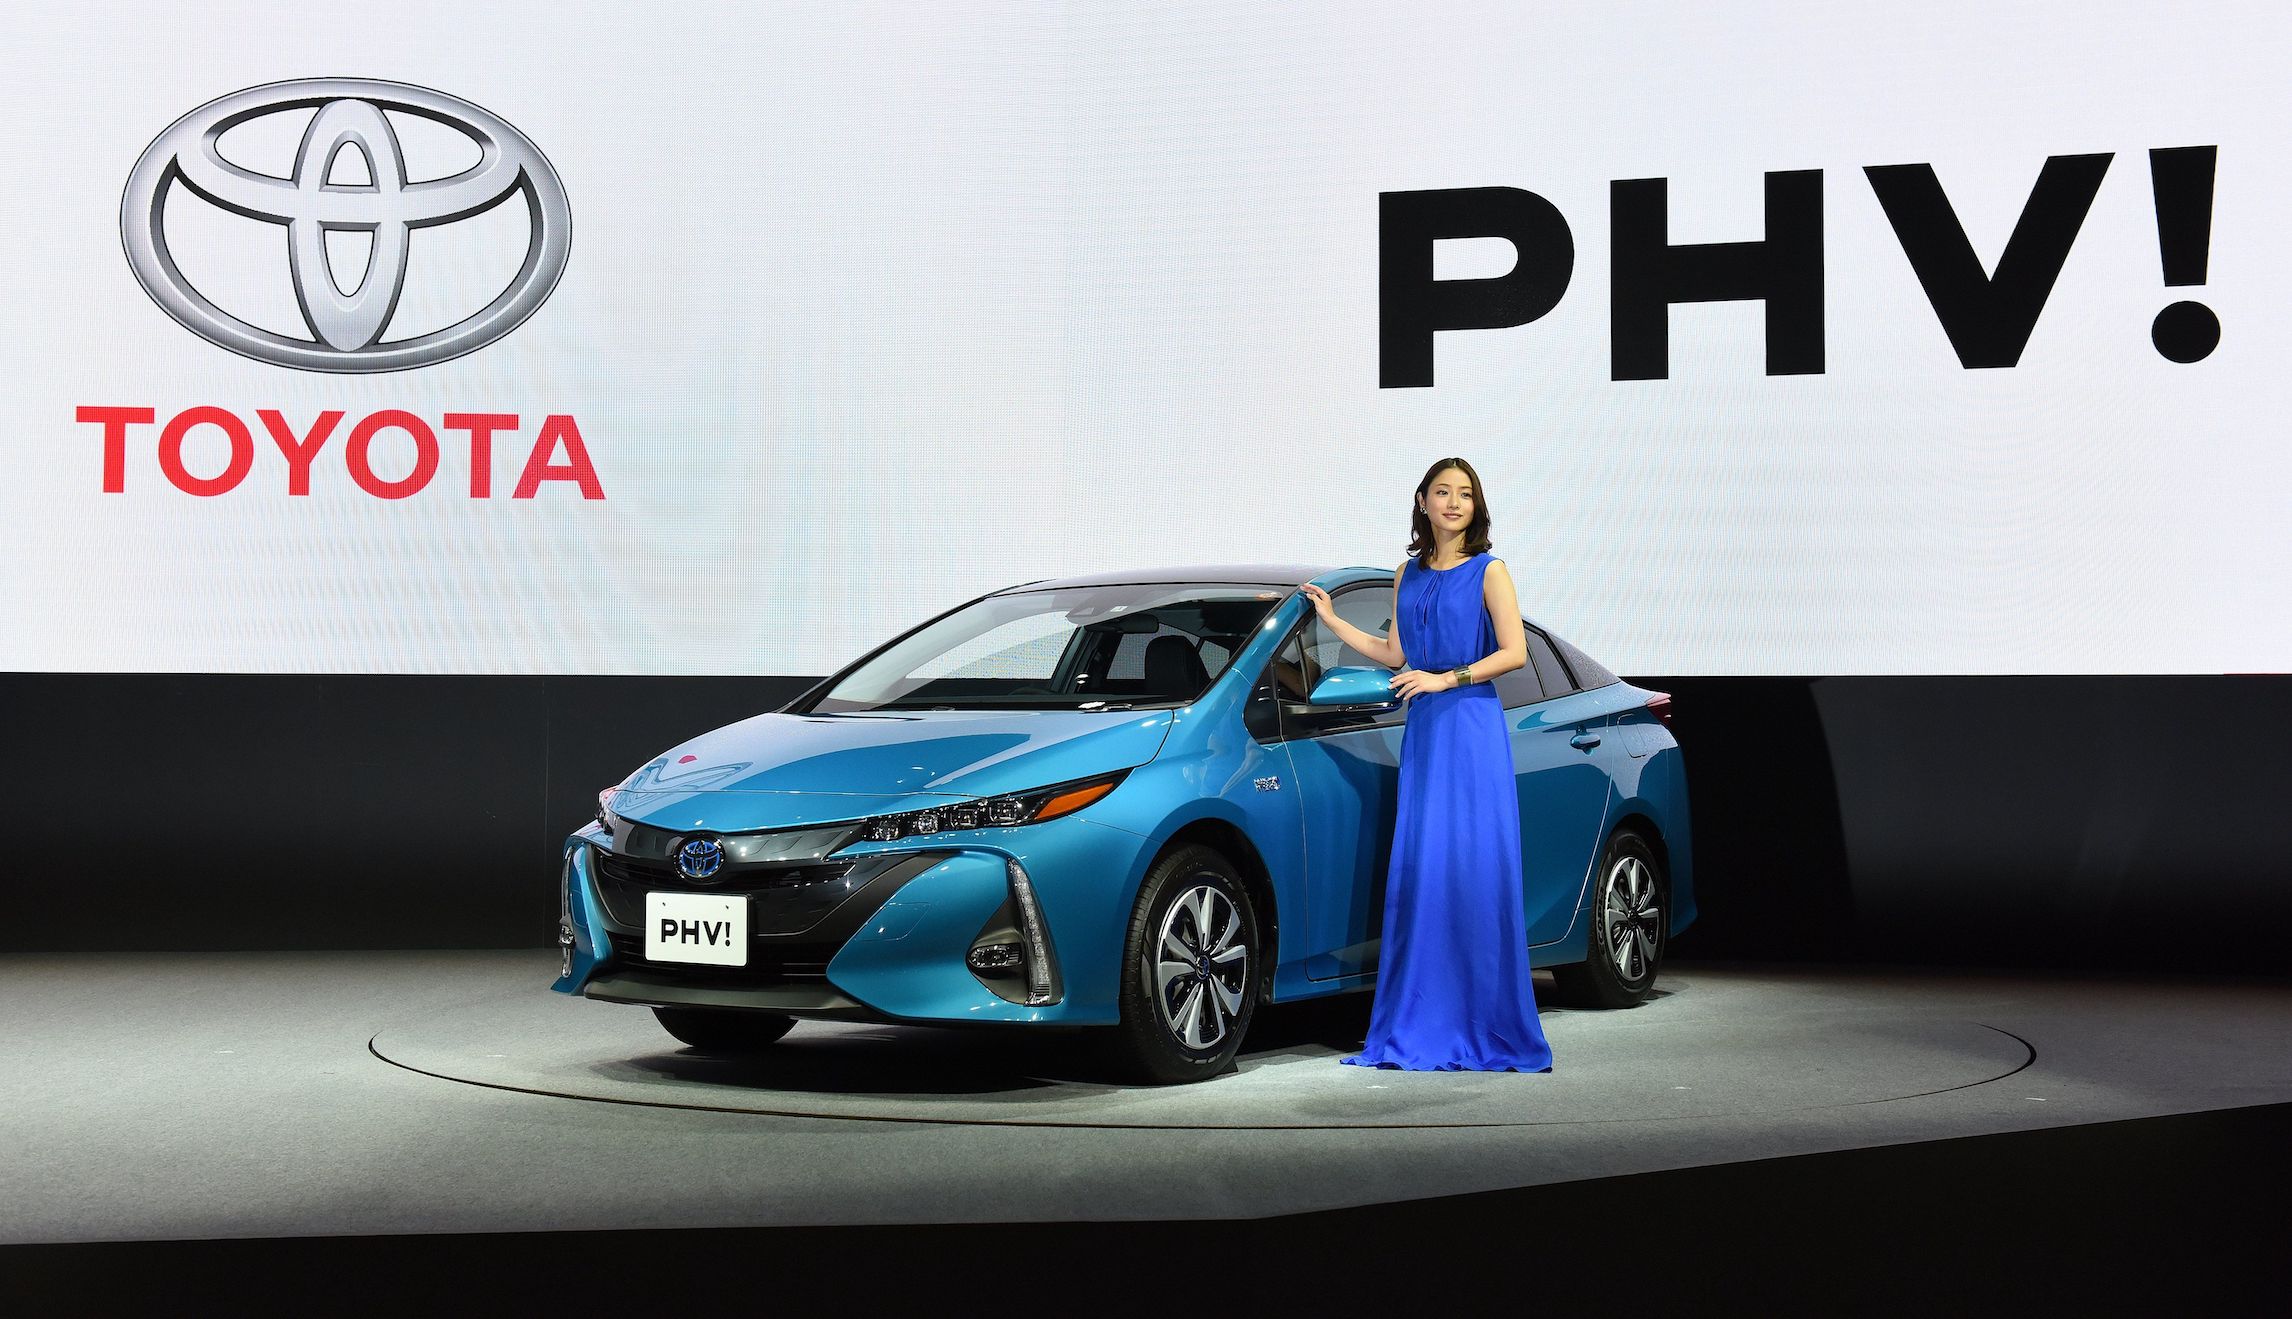 Japanese actress Satomi Ishihara poses beside a redesigned Toyota Motor Prius PHV (plug-in hybrid vehicle) during a press conference in Tokyo